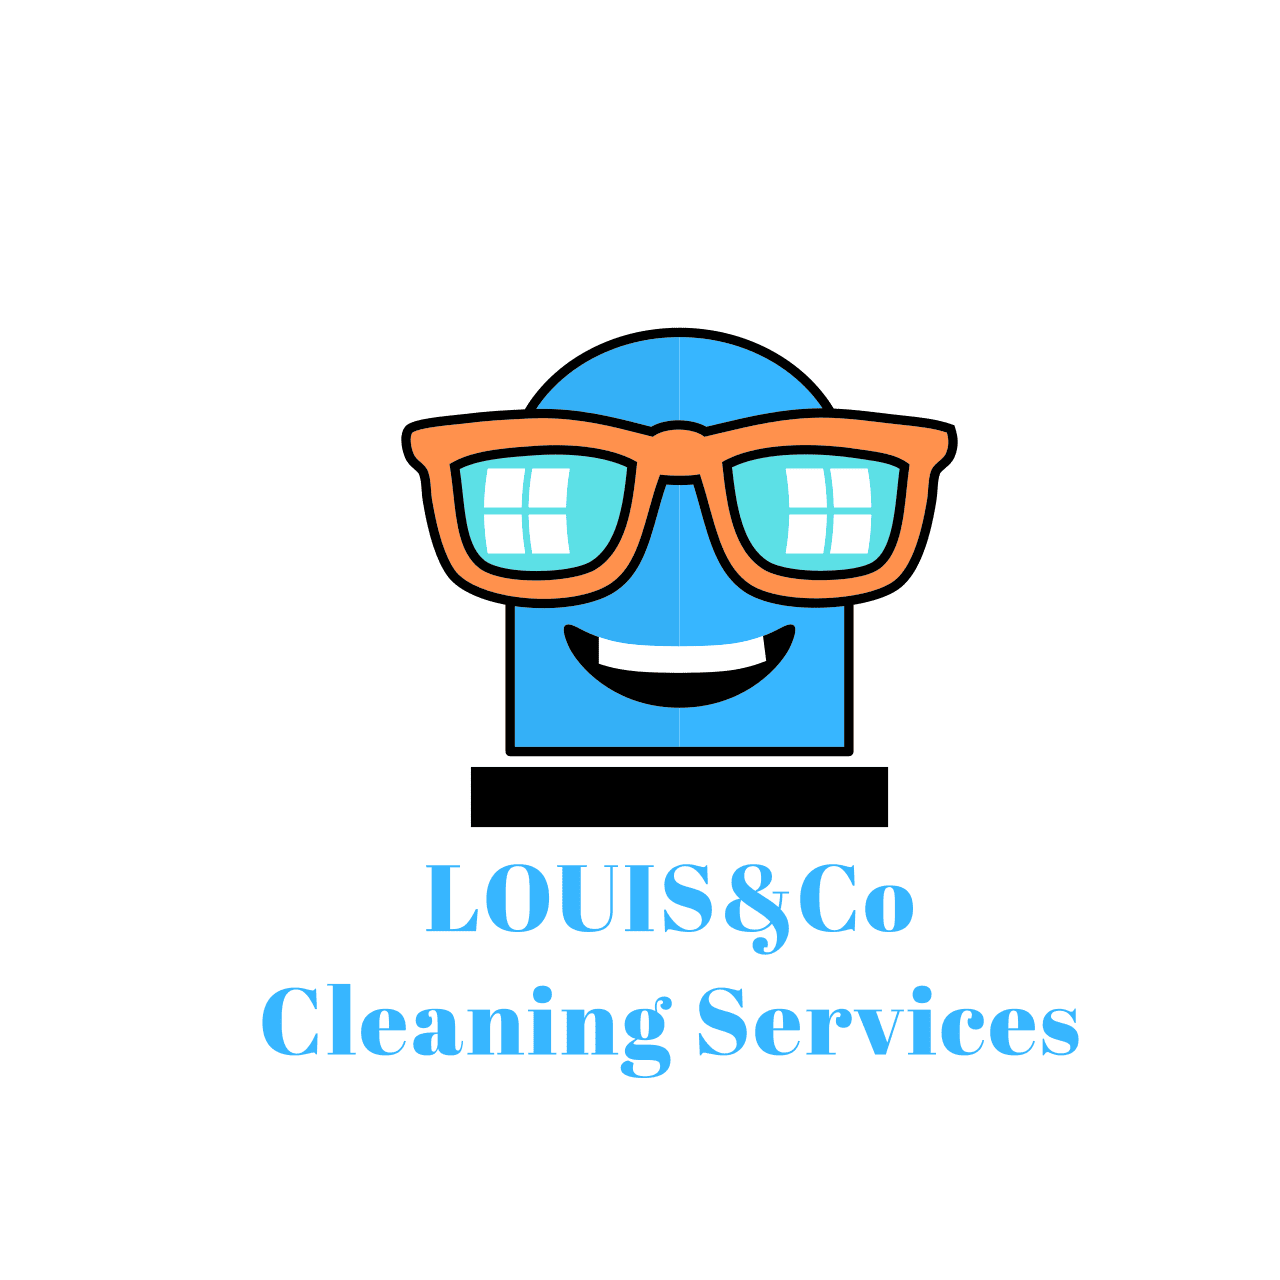 Louis&Co Cleaning Services (Window Cleaning) Logo